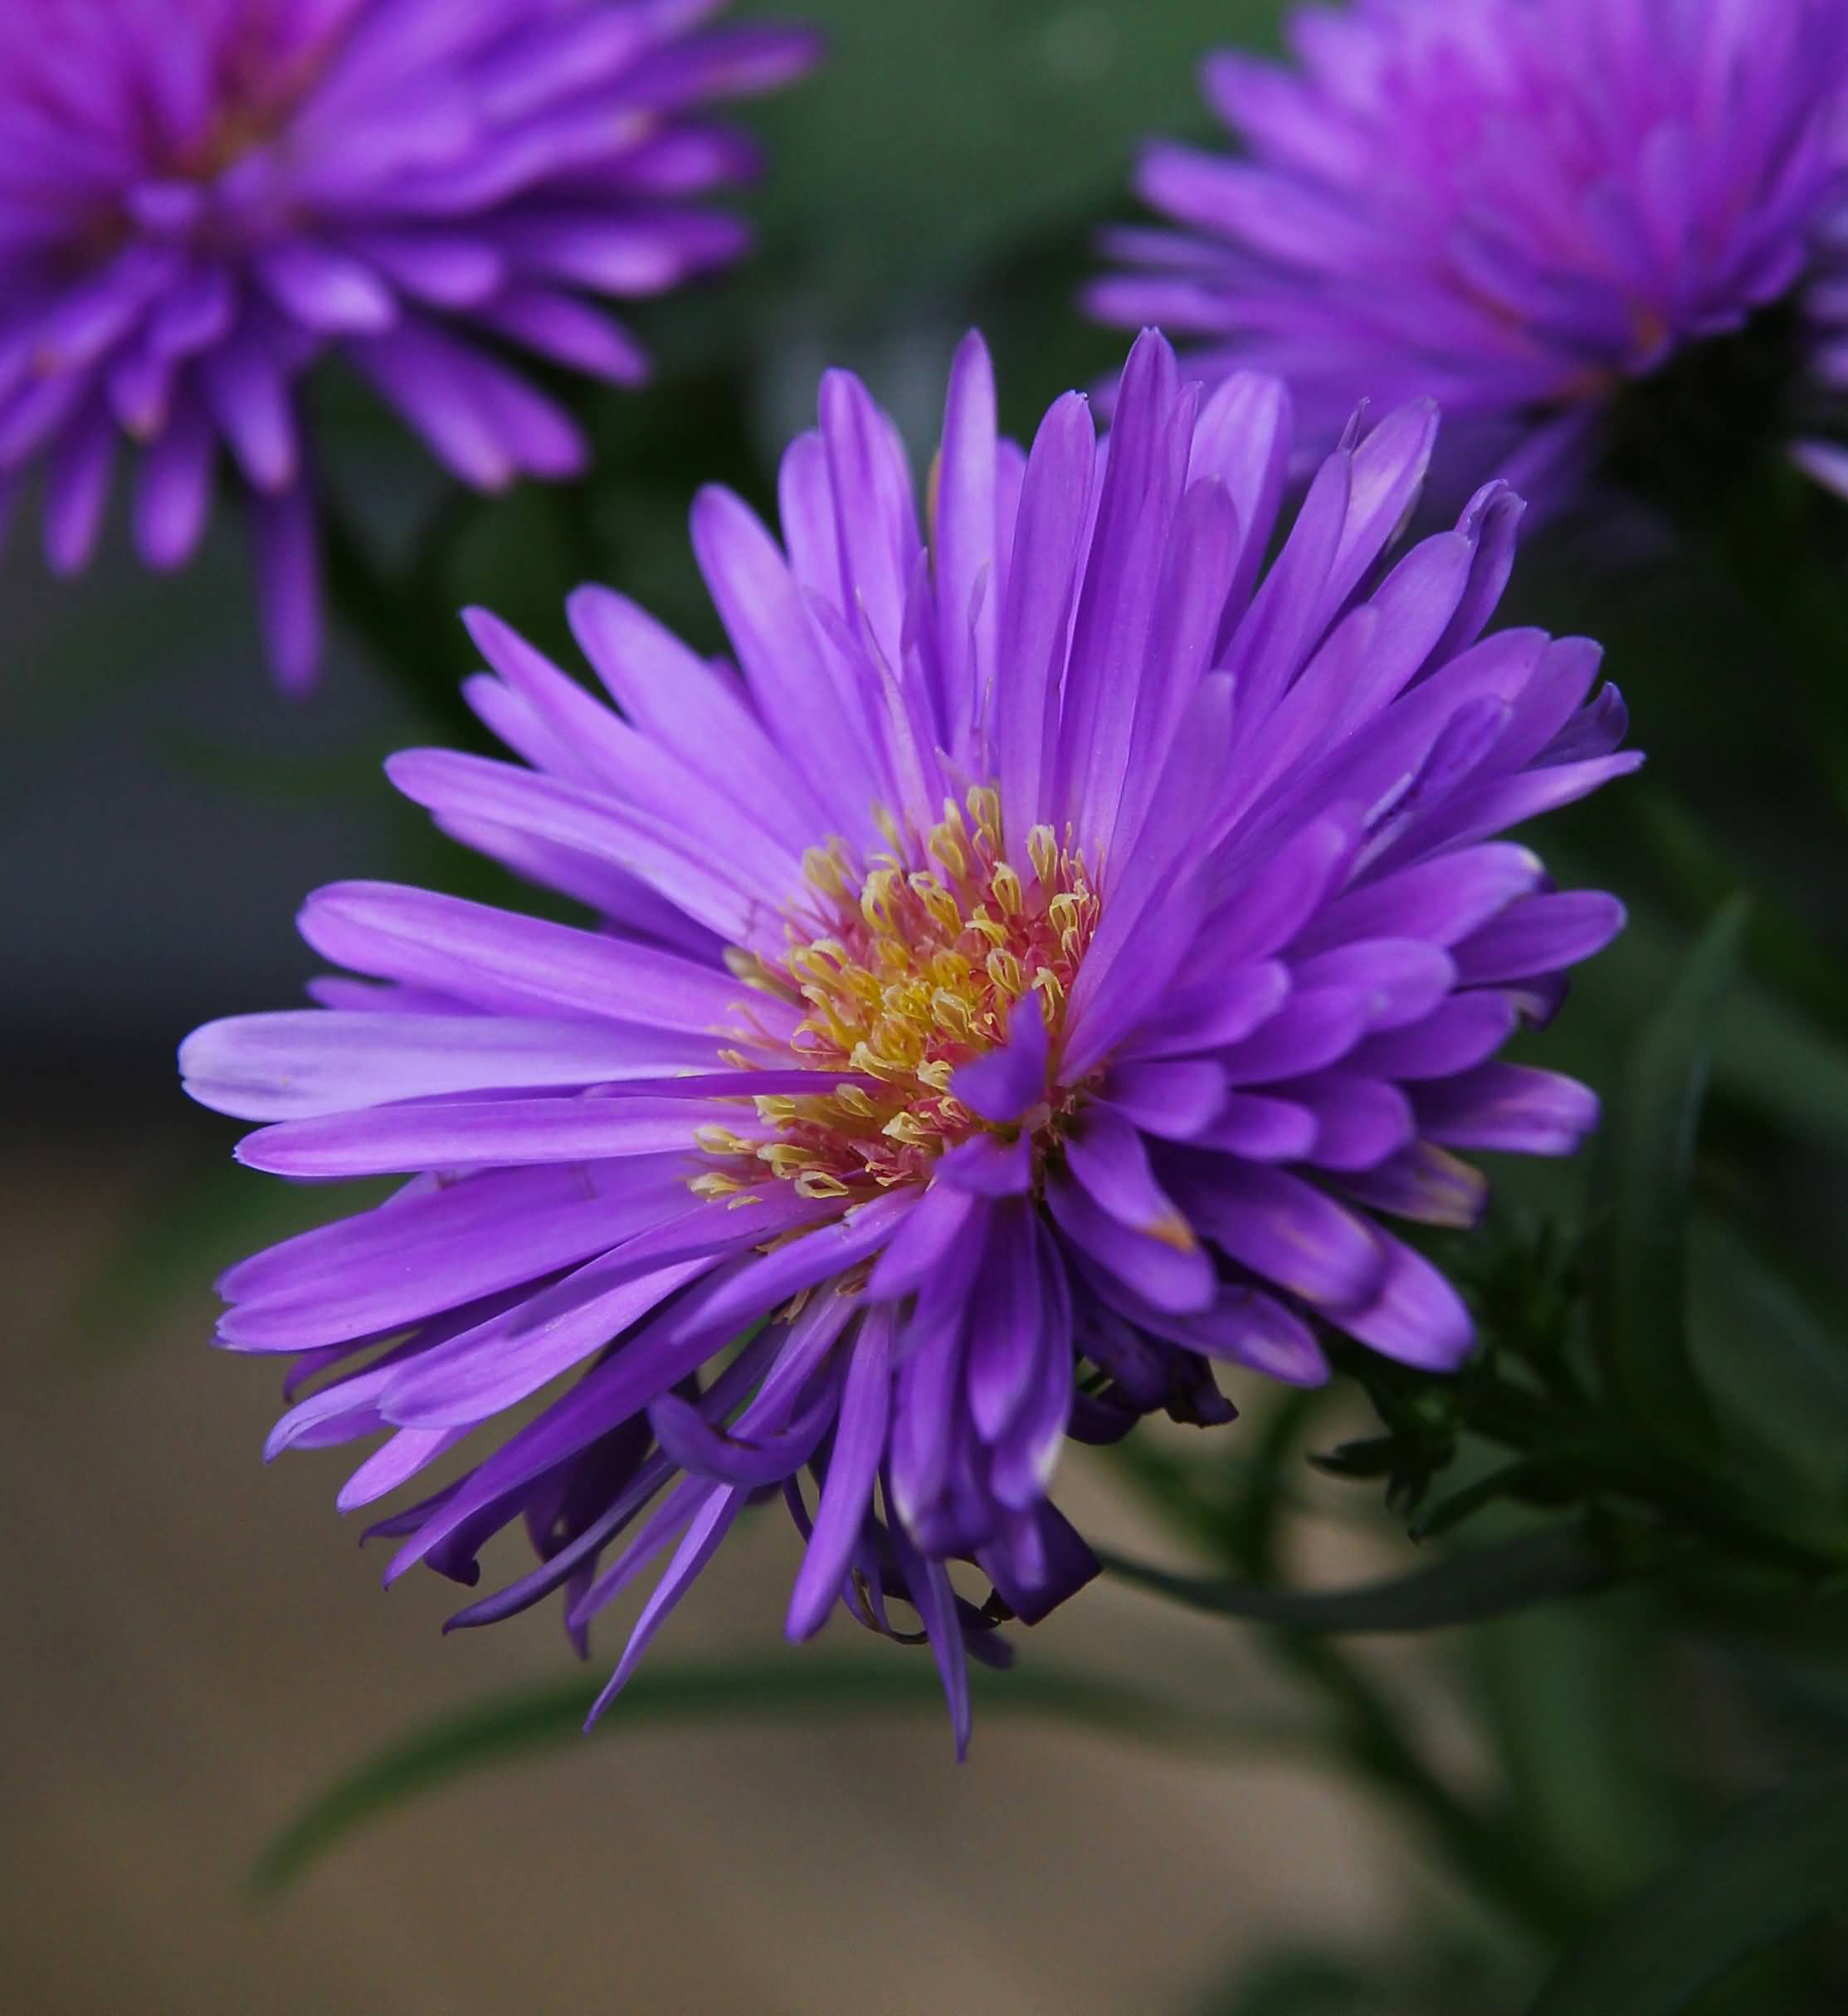 Flower of aster photo